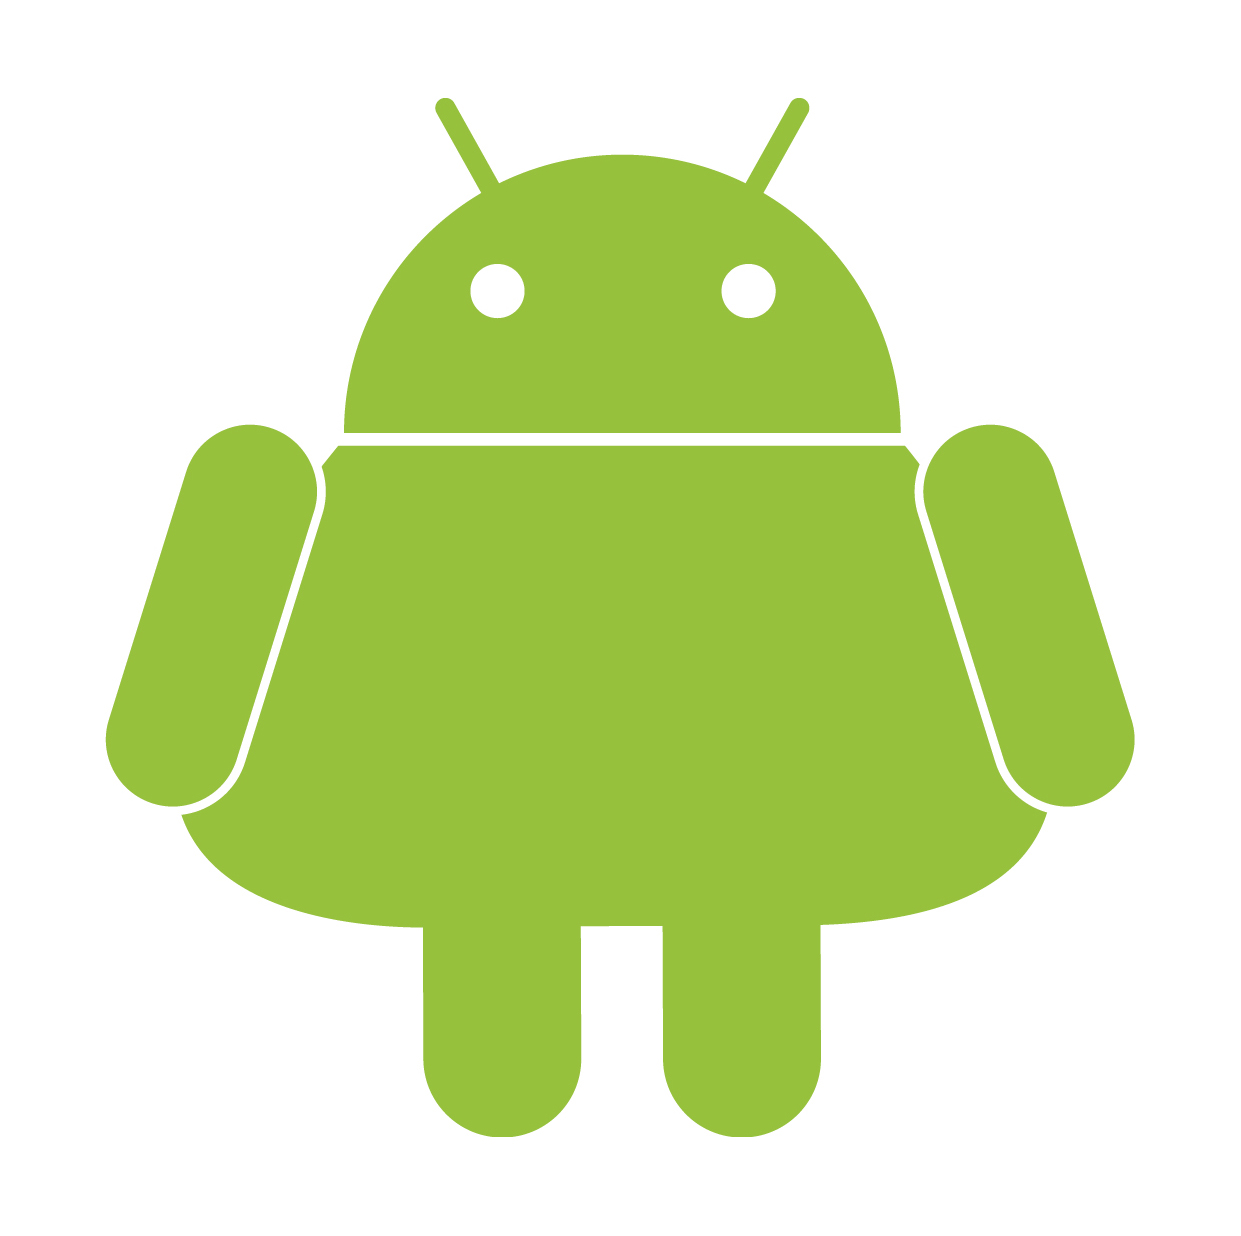 Everything андроид. Андроид 15s. Android 15. Android 23. Fat Android.